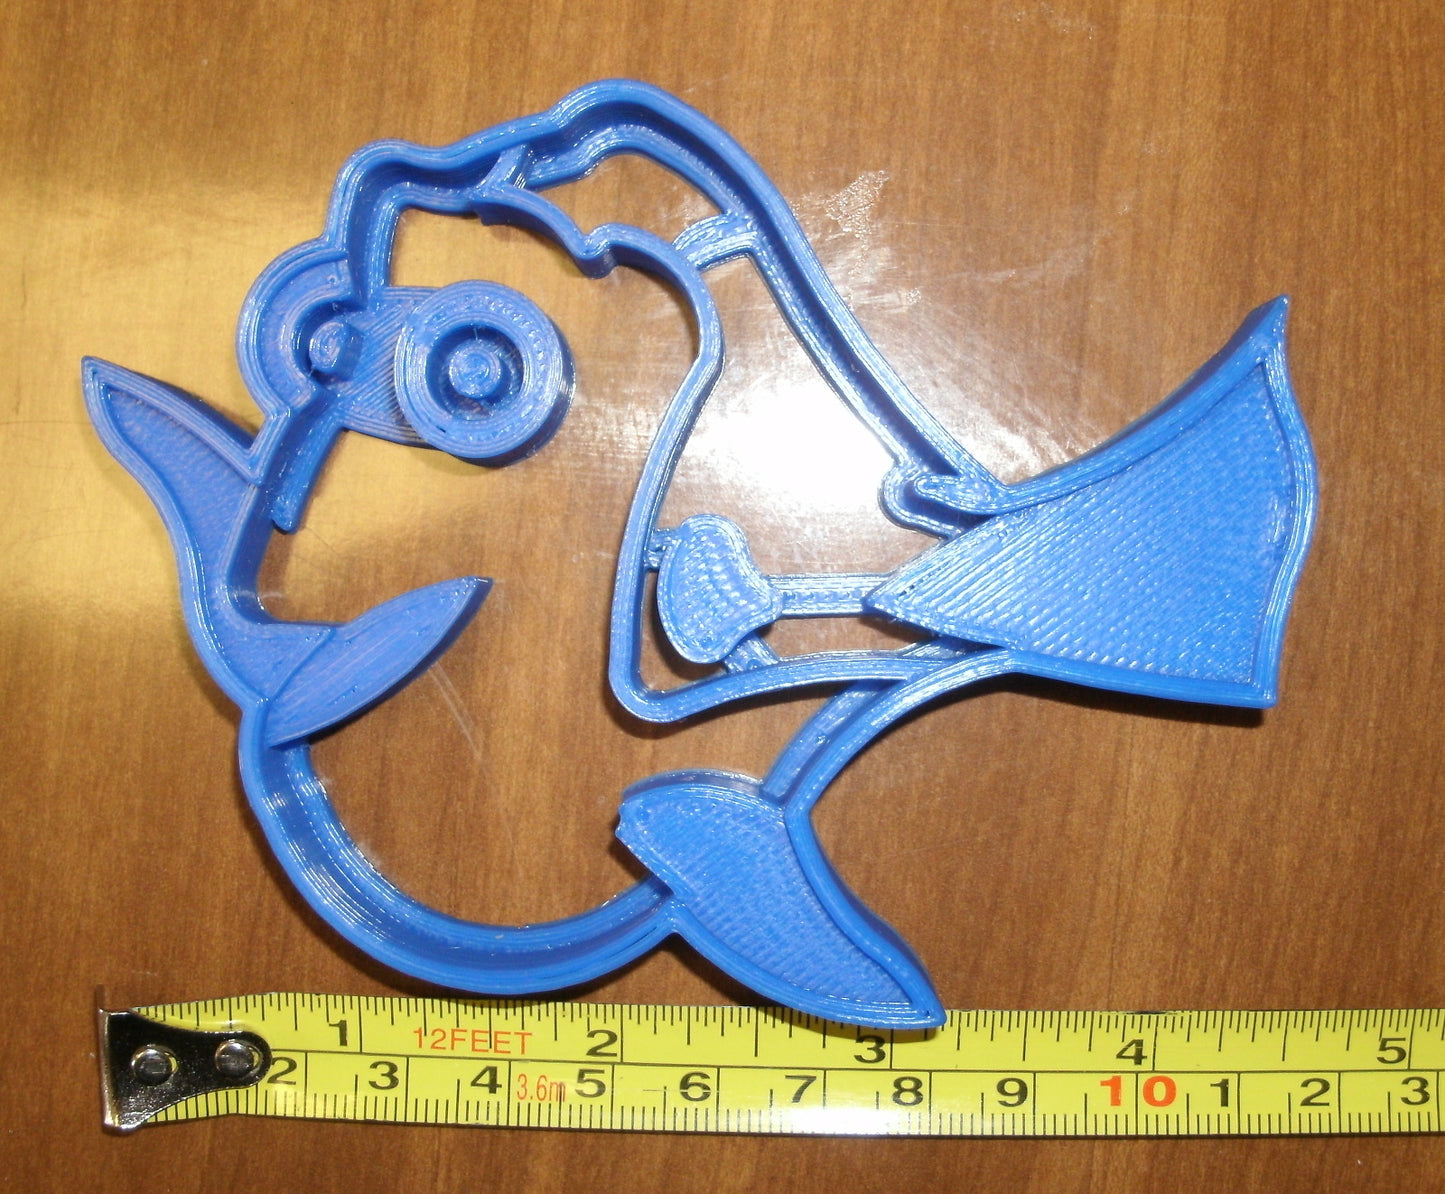 Dory Fish Finding Nemo Cartoon Character Cookie Cutter Made In USA PR524